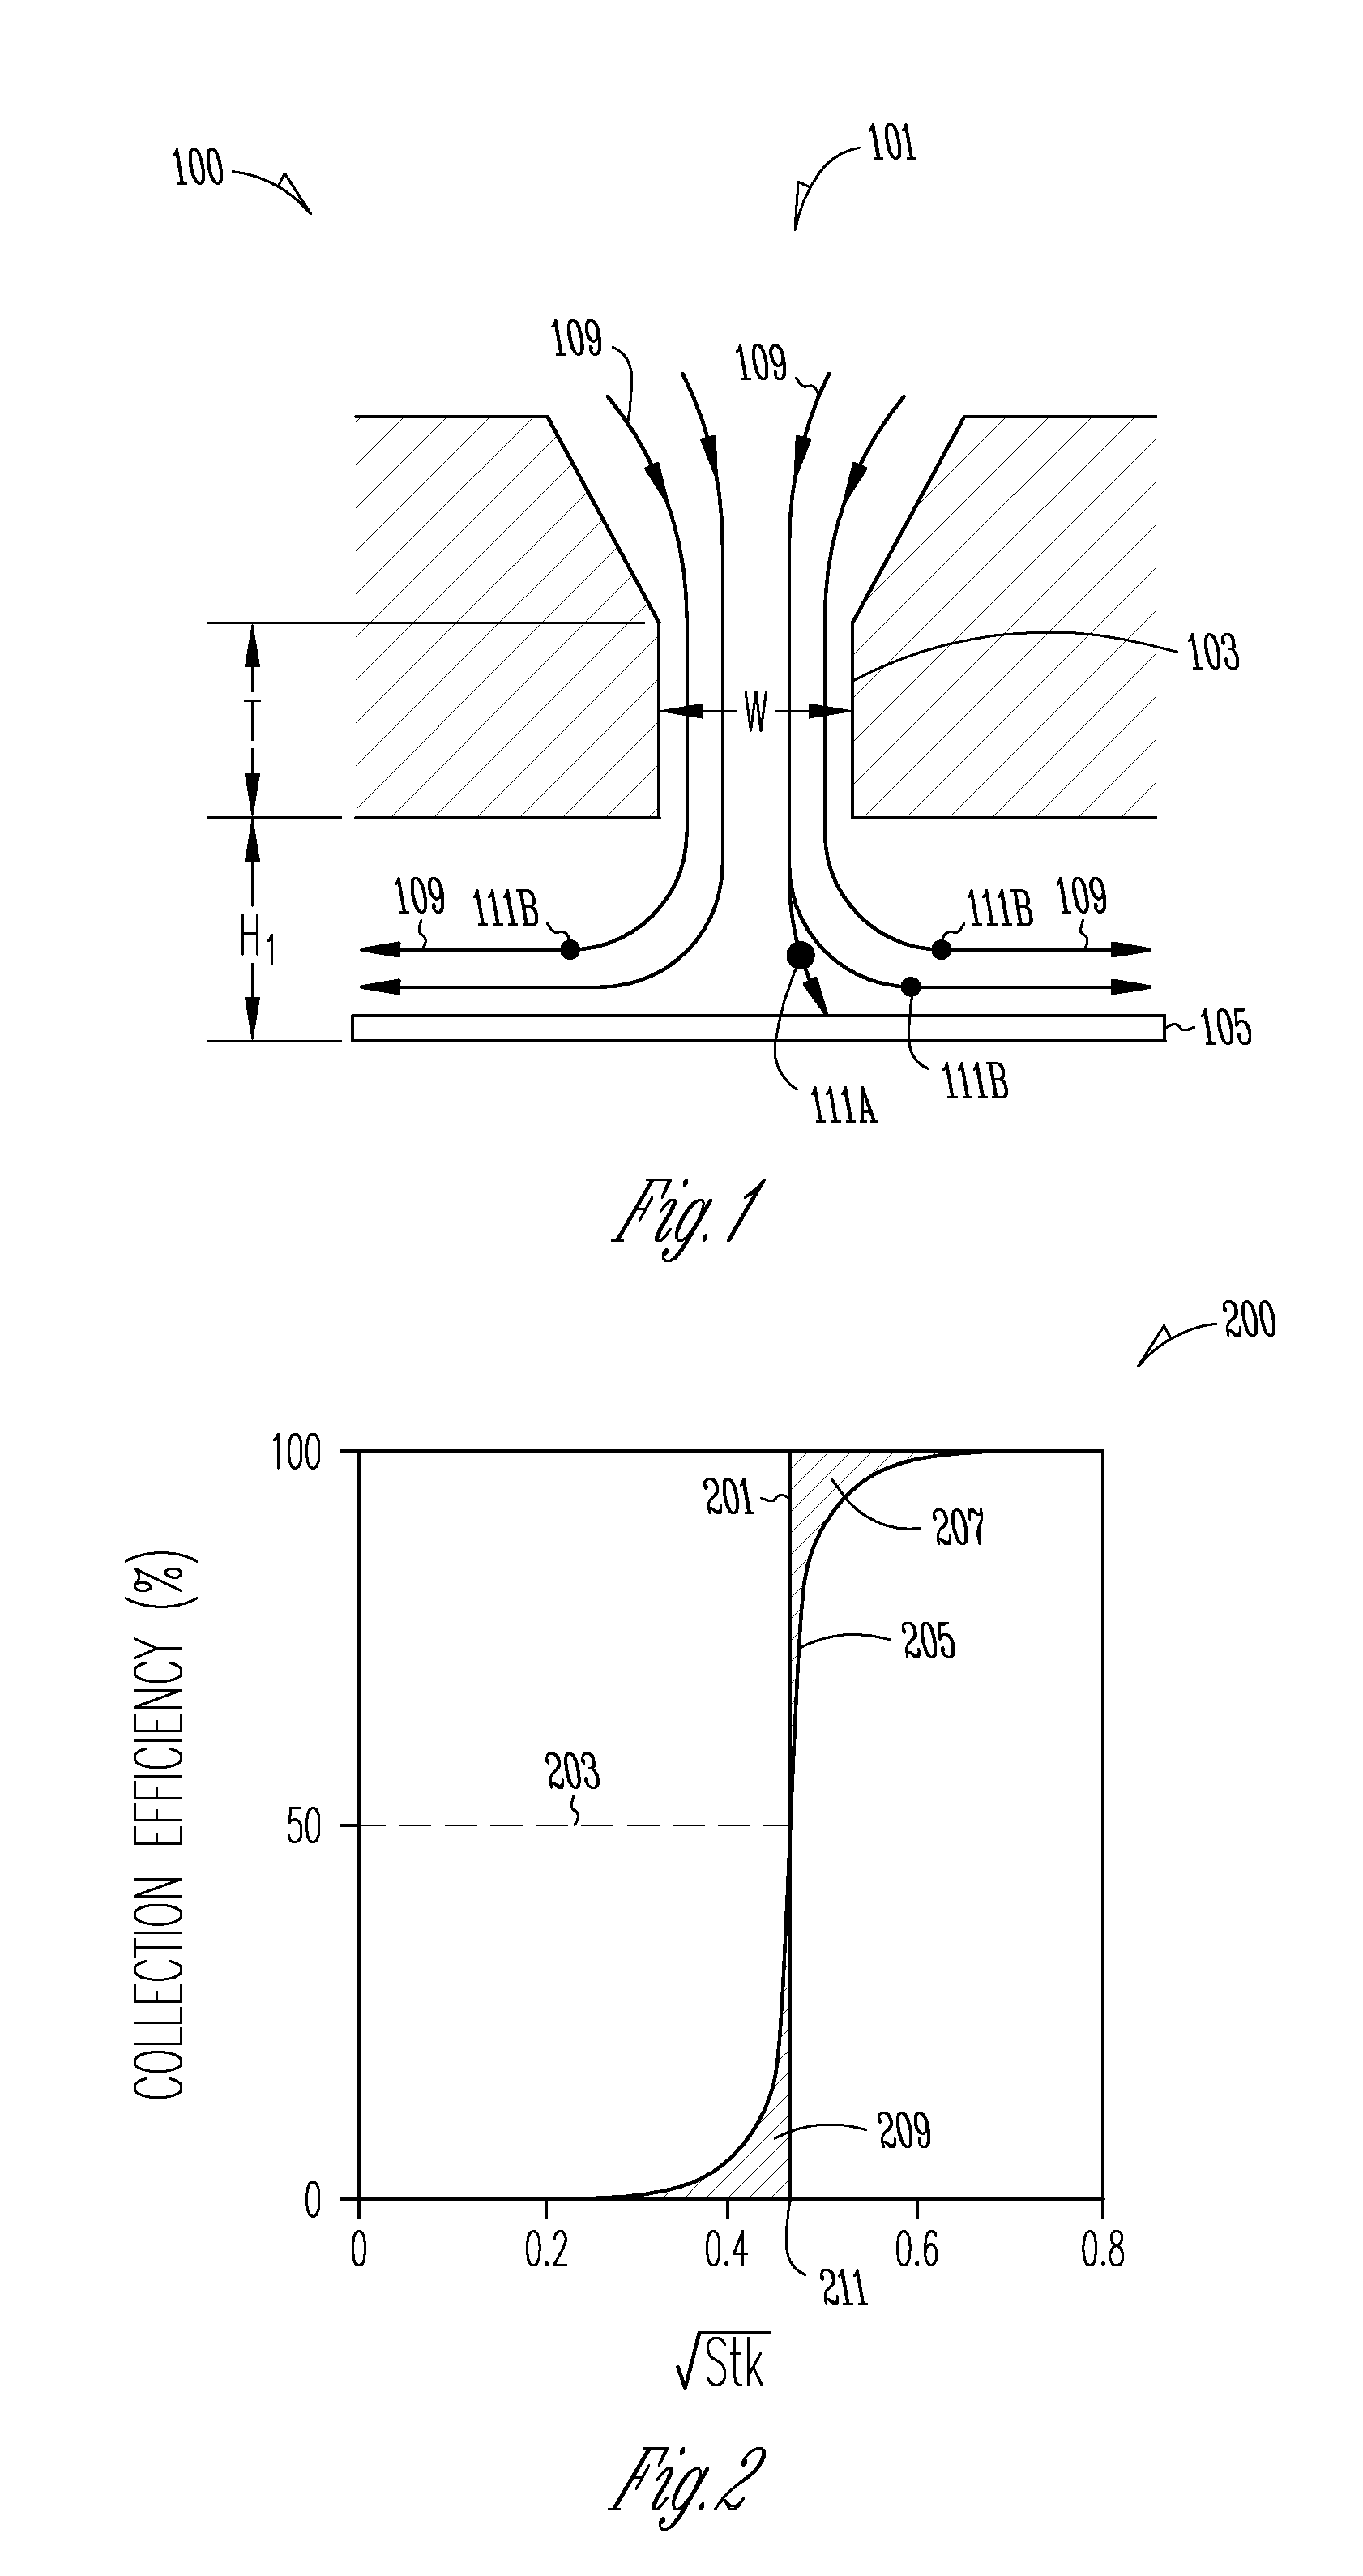 Apparatuses and methods for capturing and retaining particles